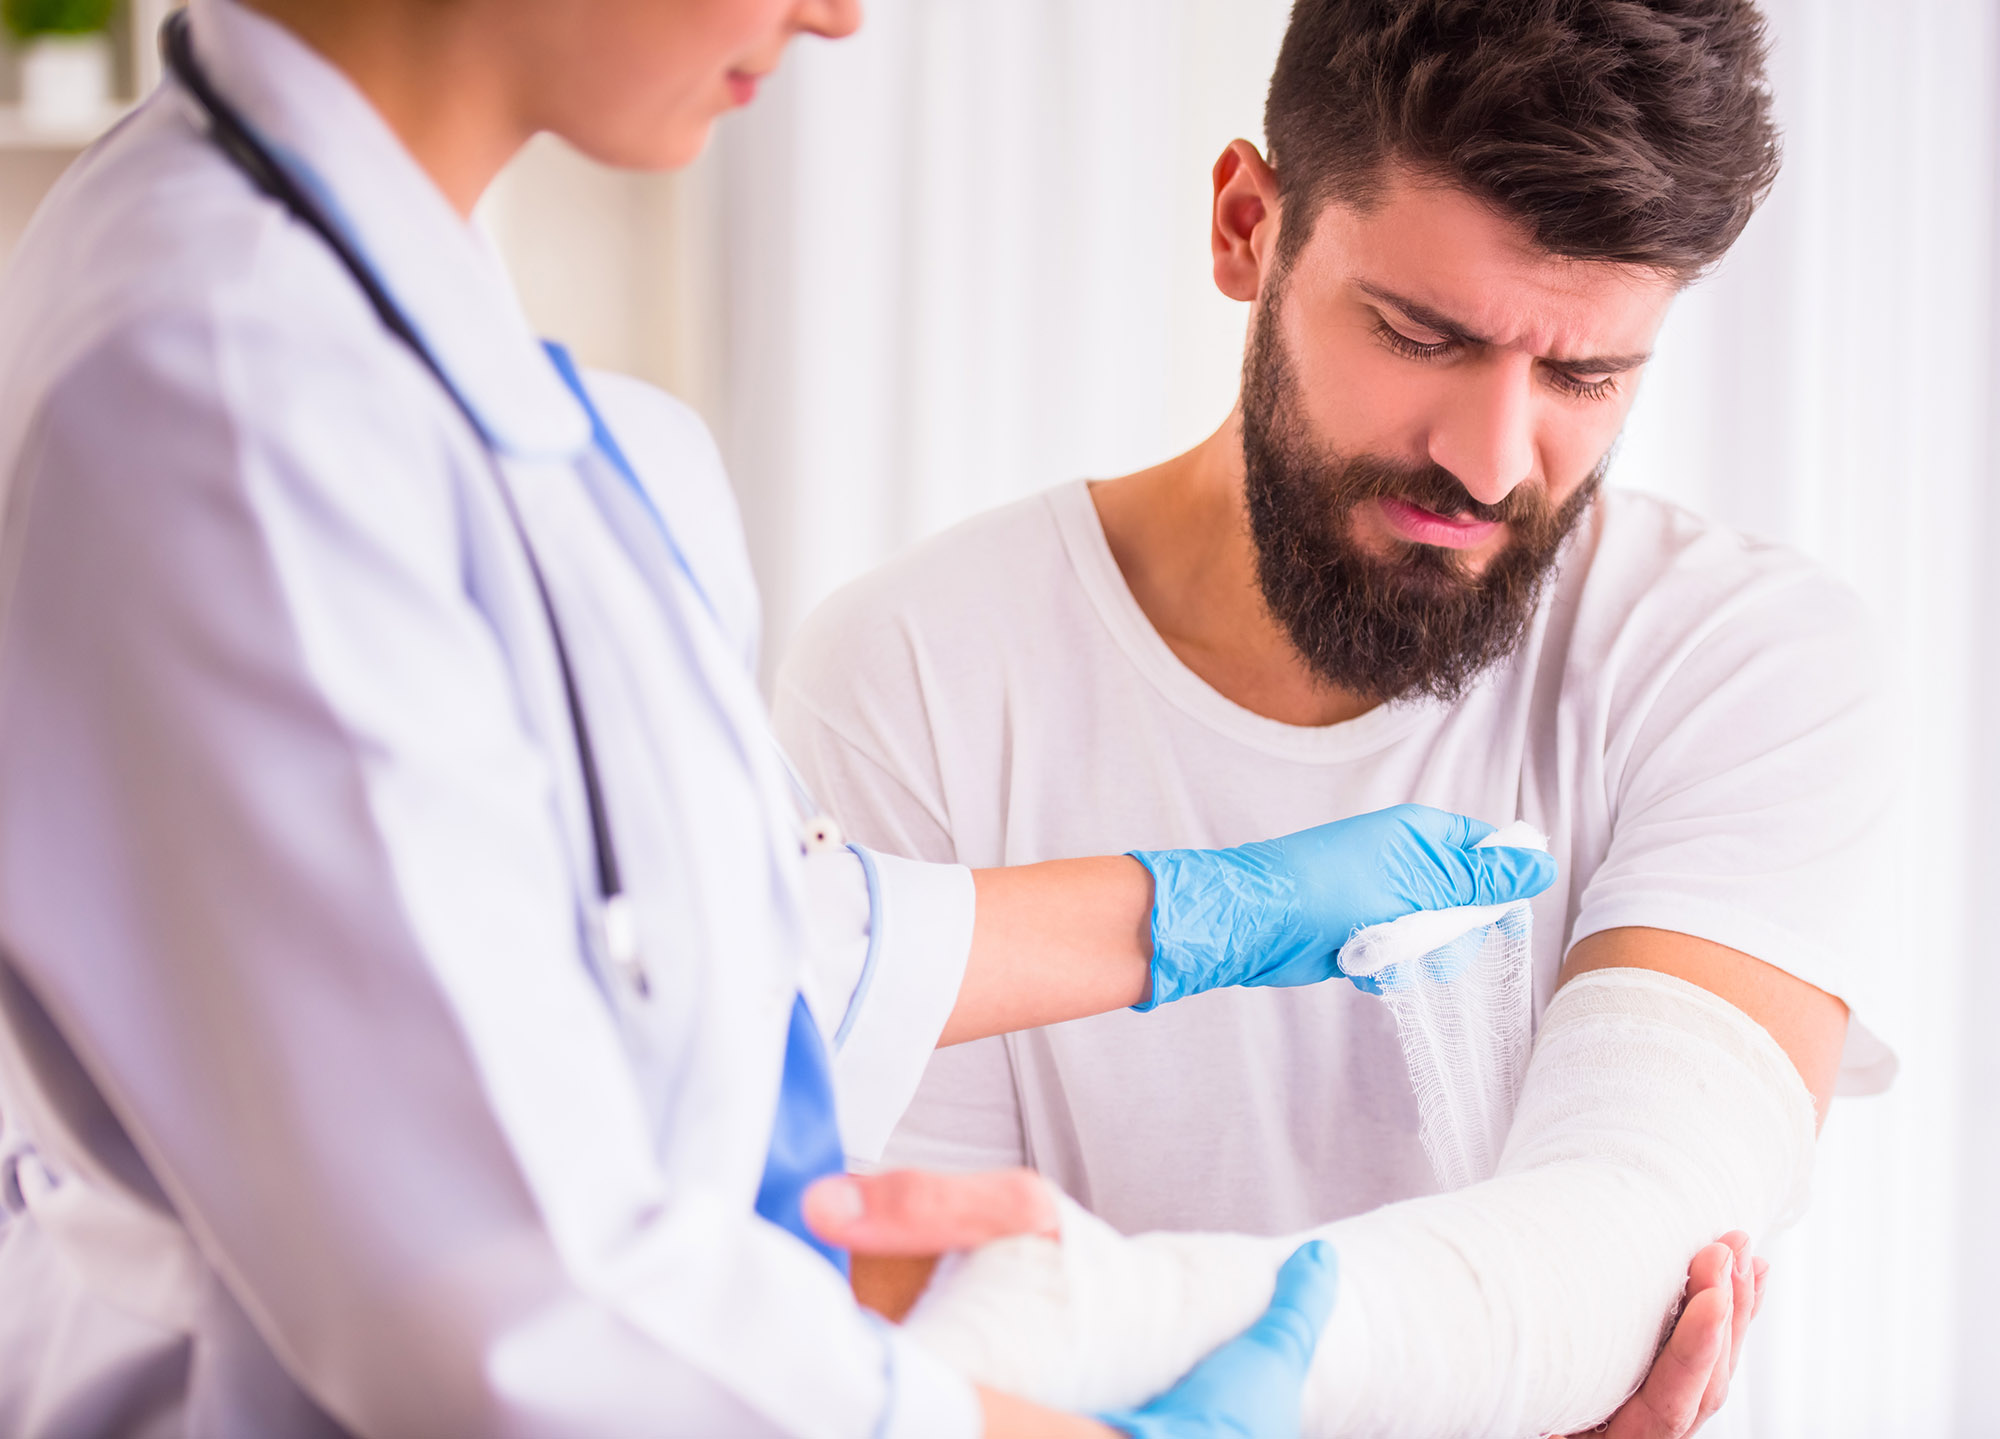 workplace arm injury compensation claims Aberdeen